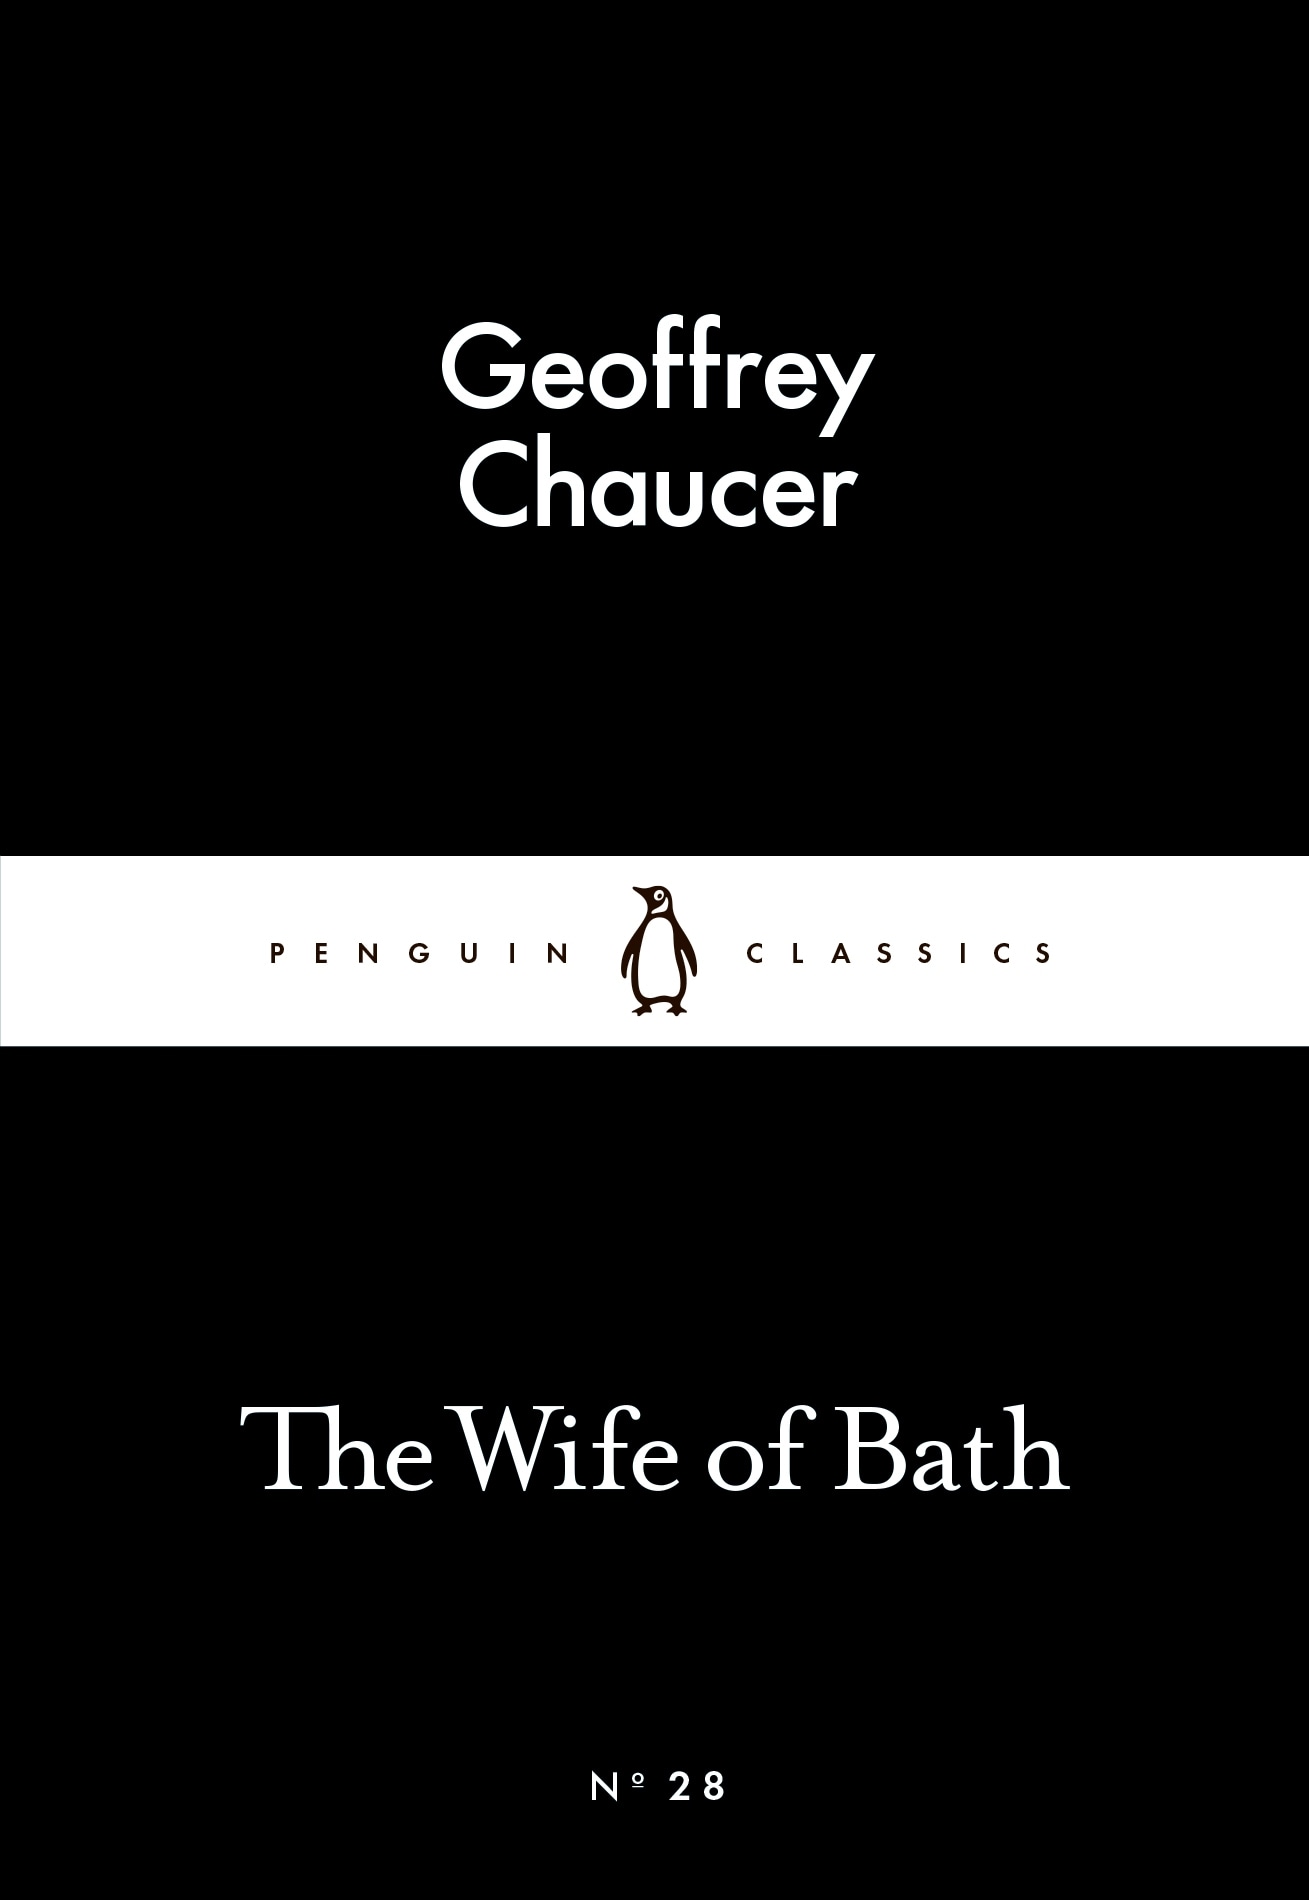 Book “The Wife of Bath” by Geoffrey Chaucer — February 26, 2015